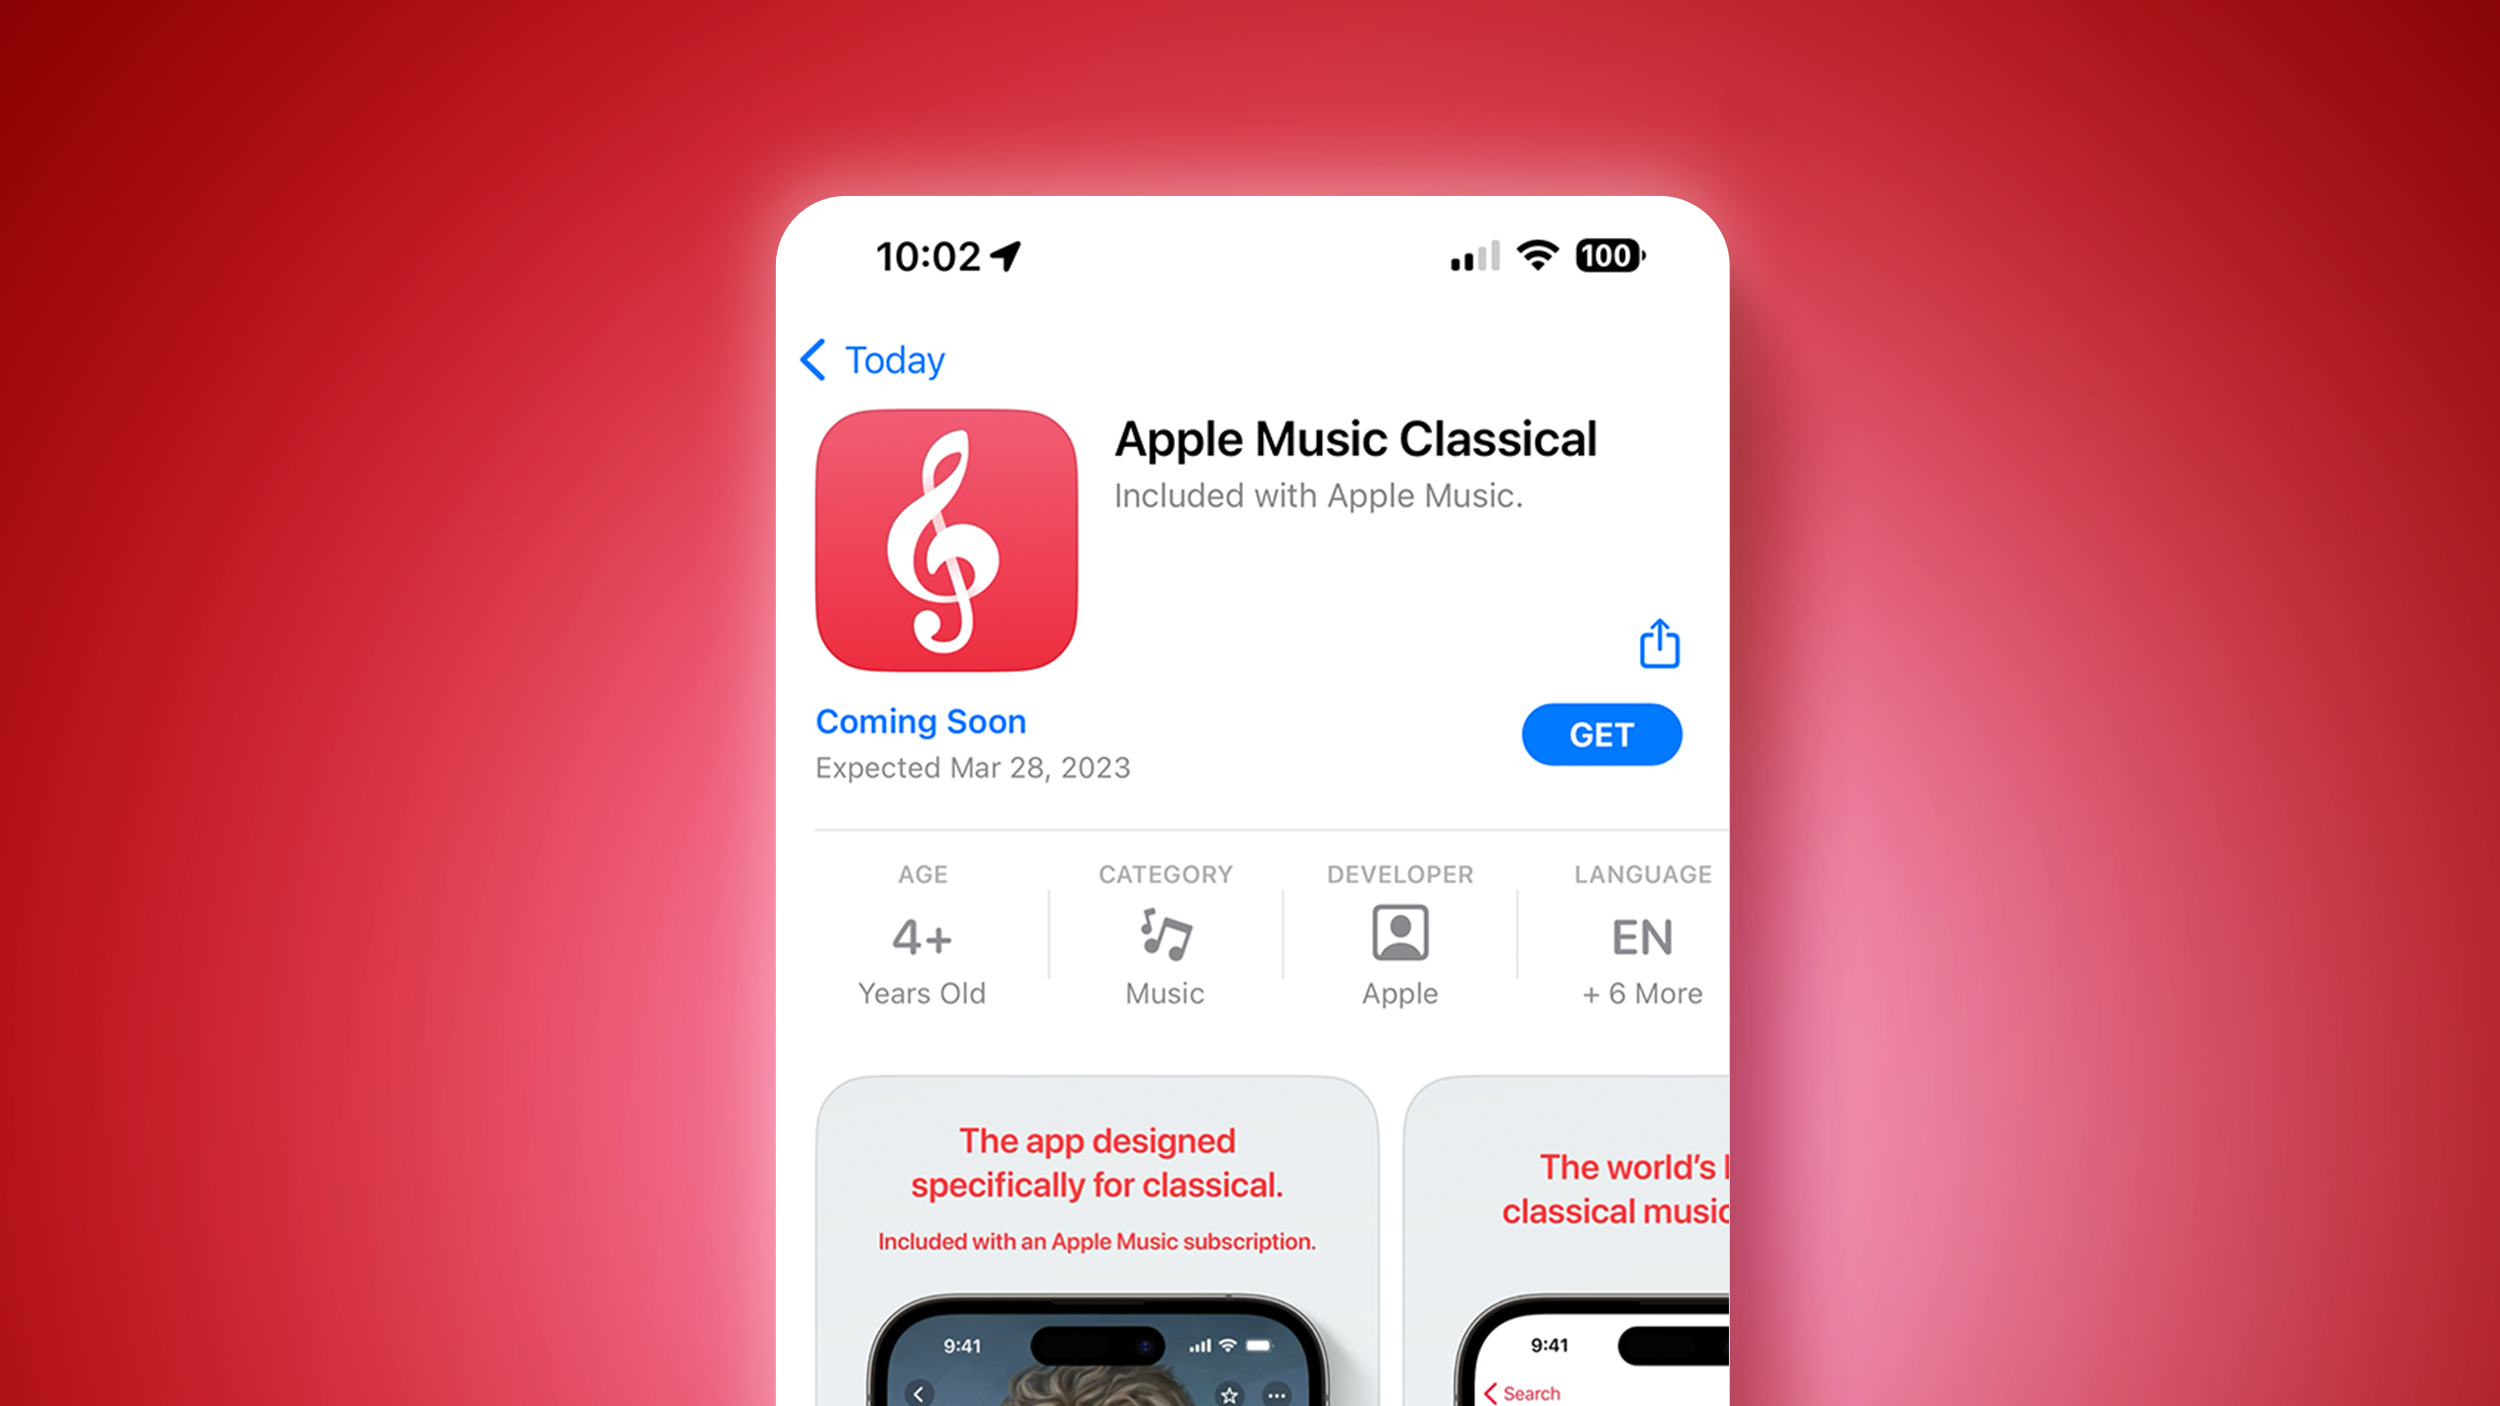 Apple Music Classical Now Available for Pre-Order on the App Store, Launches Later This Month